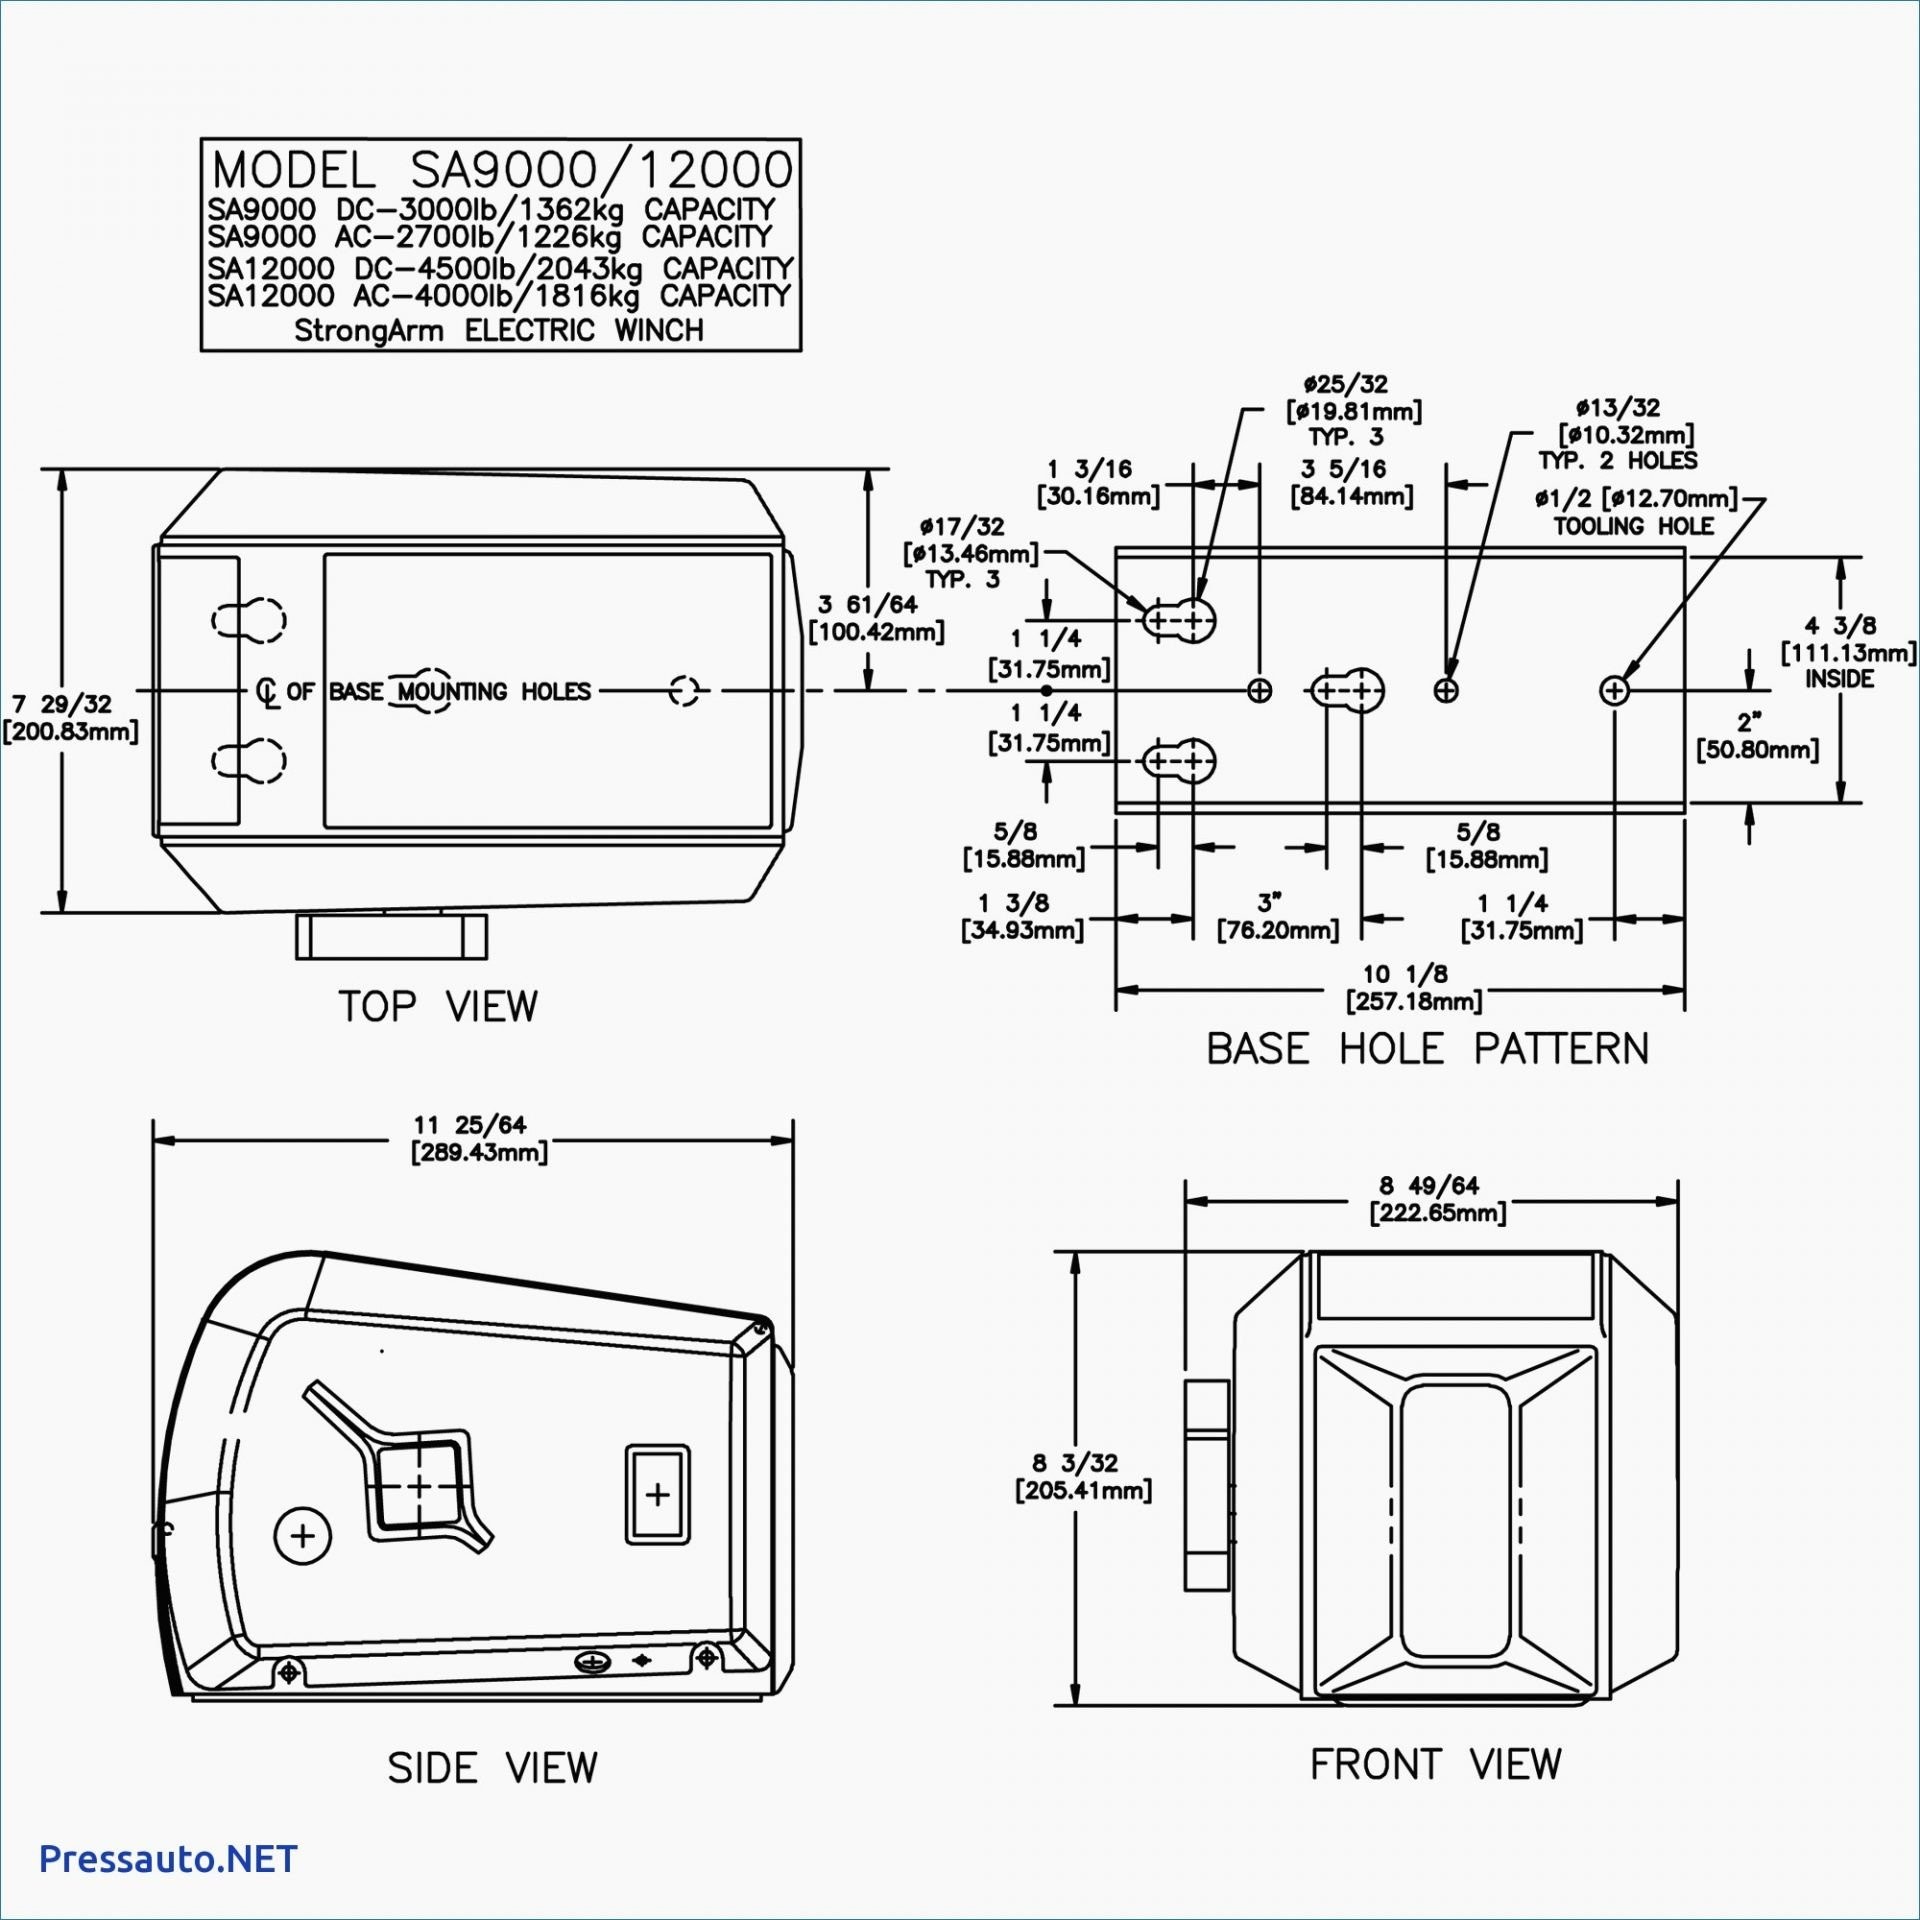 Winch isolator Switch Wiring Diagram Fresh solenoid Switch Wiring Superwinch Related Post